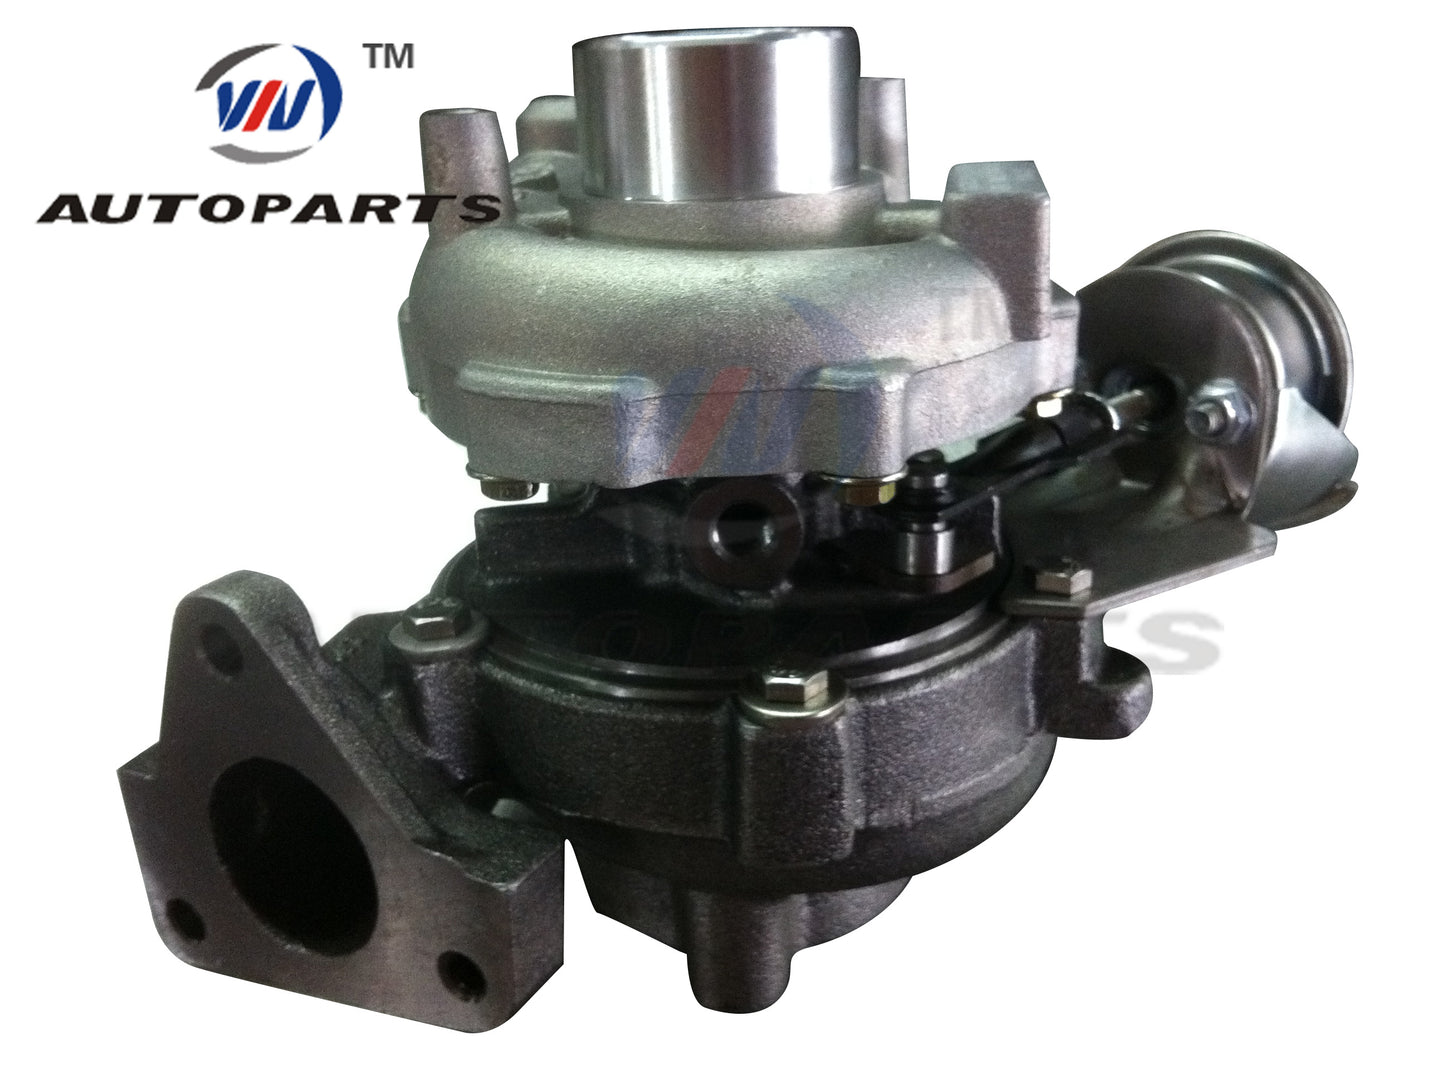 Turbocharger 700960-5012S for Audi Seat VW varies with 1.2L Diesel Engine